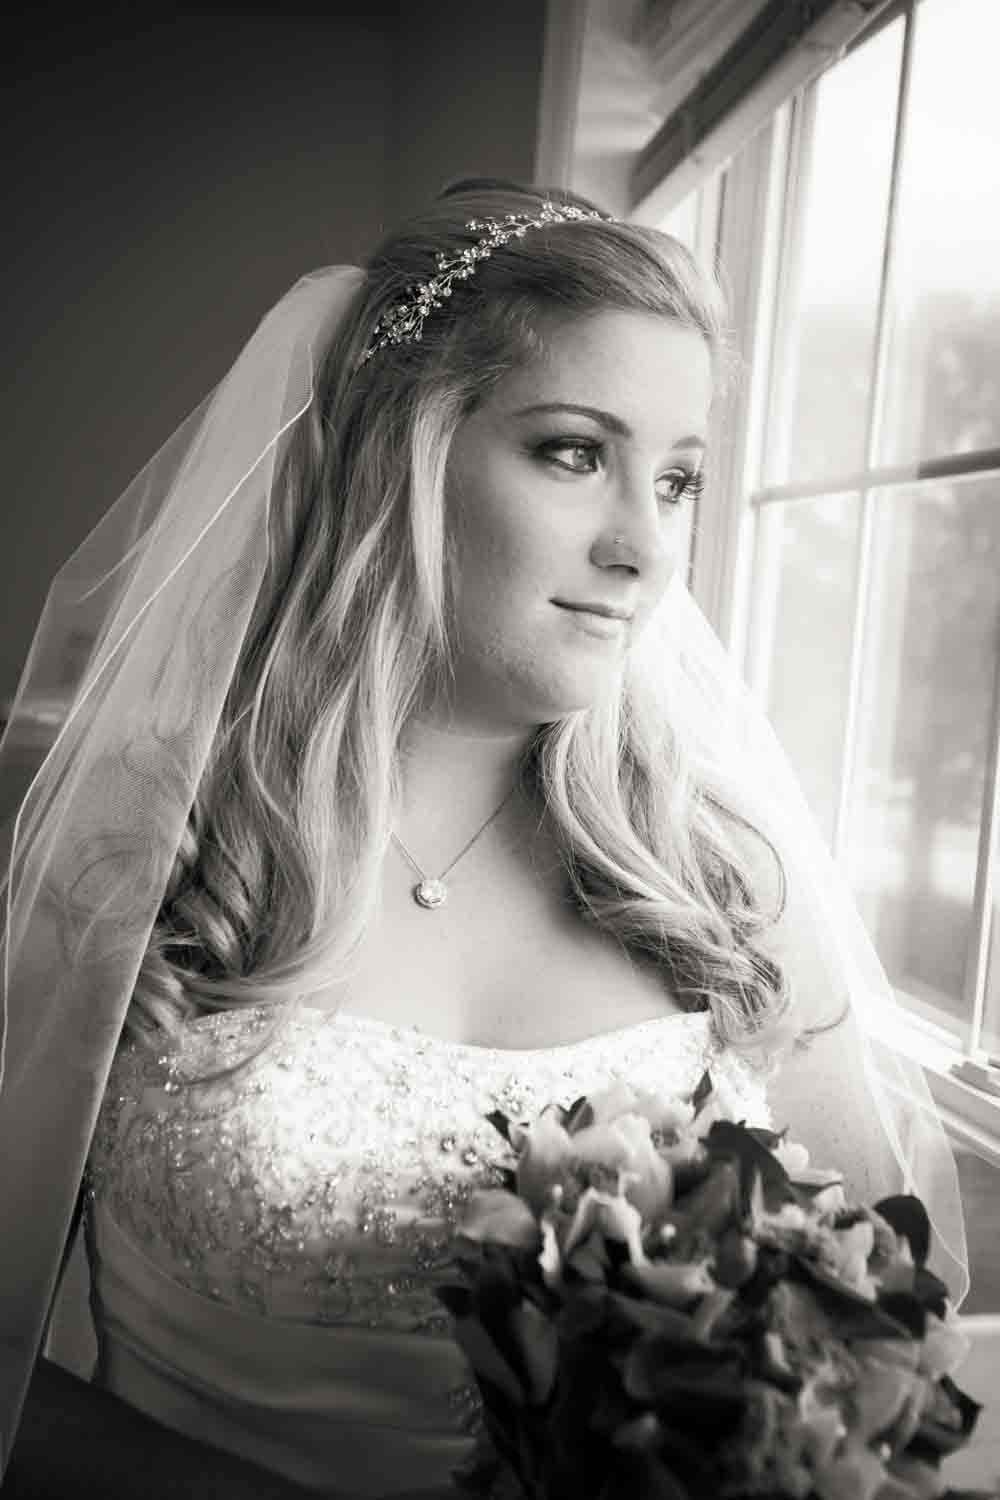 Black and white portrait of bride at window